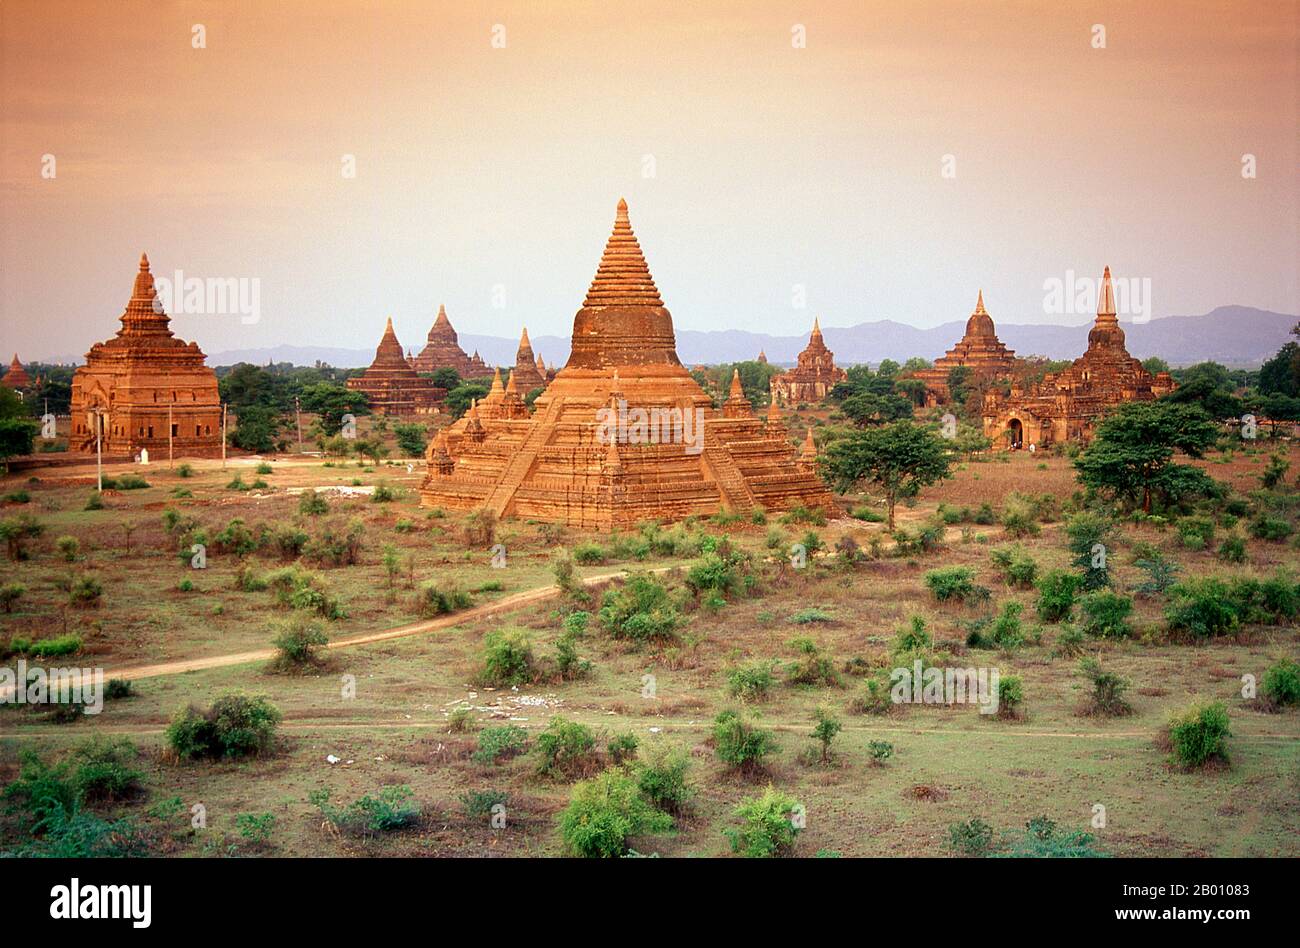 Burma: Temples strewn across the plain, Bagan (Pagan) Ancient City.  Bagan, formerly Pagan, was mainly built between the 11th century and 13th century. Formally titled Arimaddanapura or Arimaddana (the City of the Enemy Crusher) and also known as Tambadipa (the Land of Copper) or Tassadessa (the Parched Land), it was the capital of several ancient kingdoms in Burma. Stock Photo